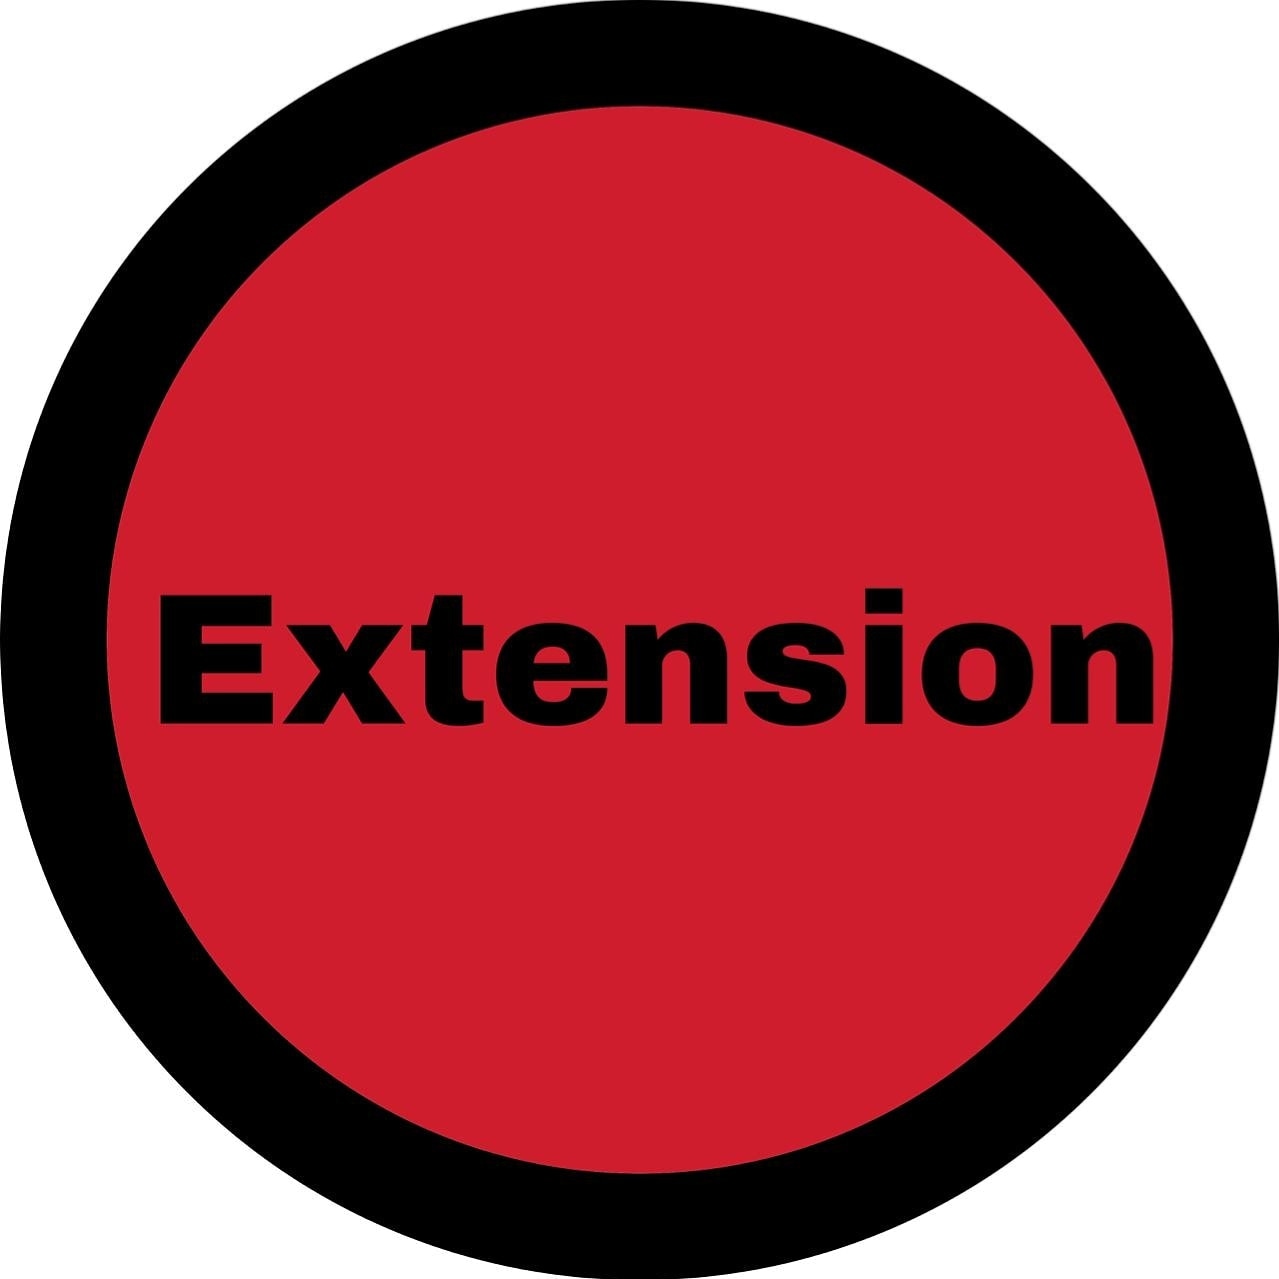 EXTENSION